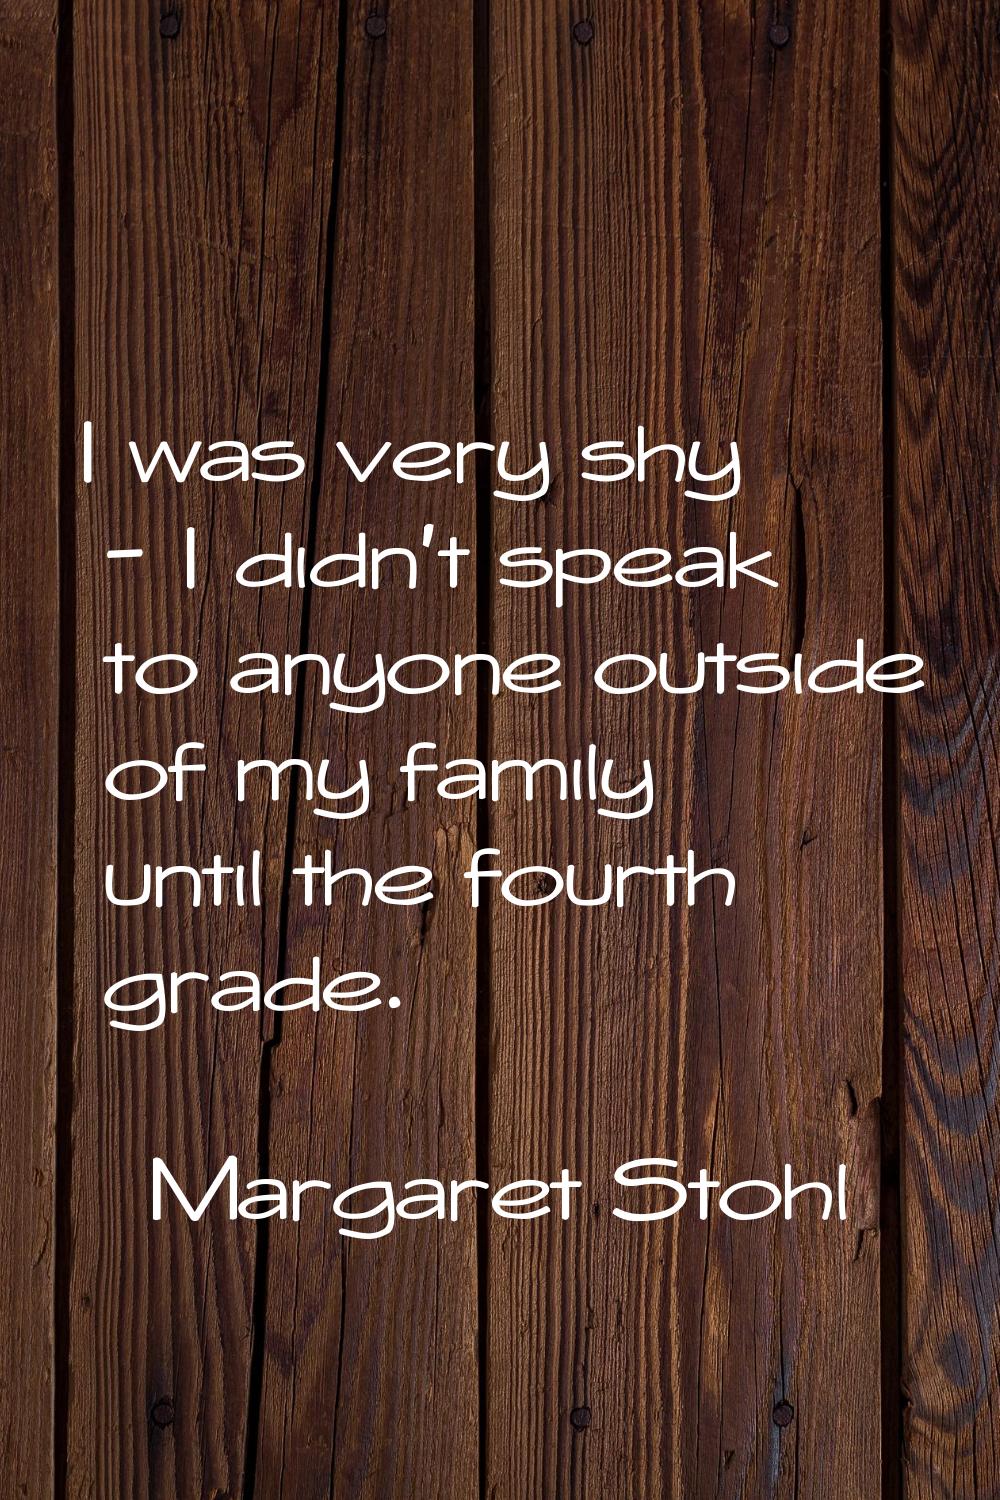 I was very shy - I didn't speak to anyone outside of my family until the fourth grade.